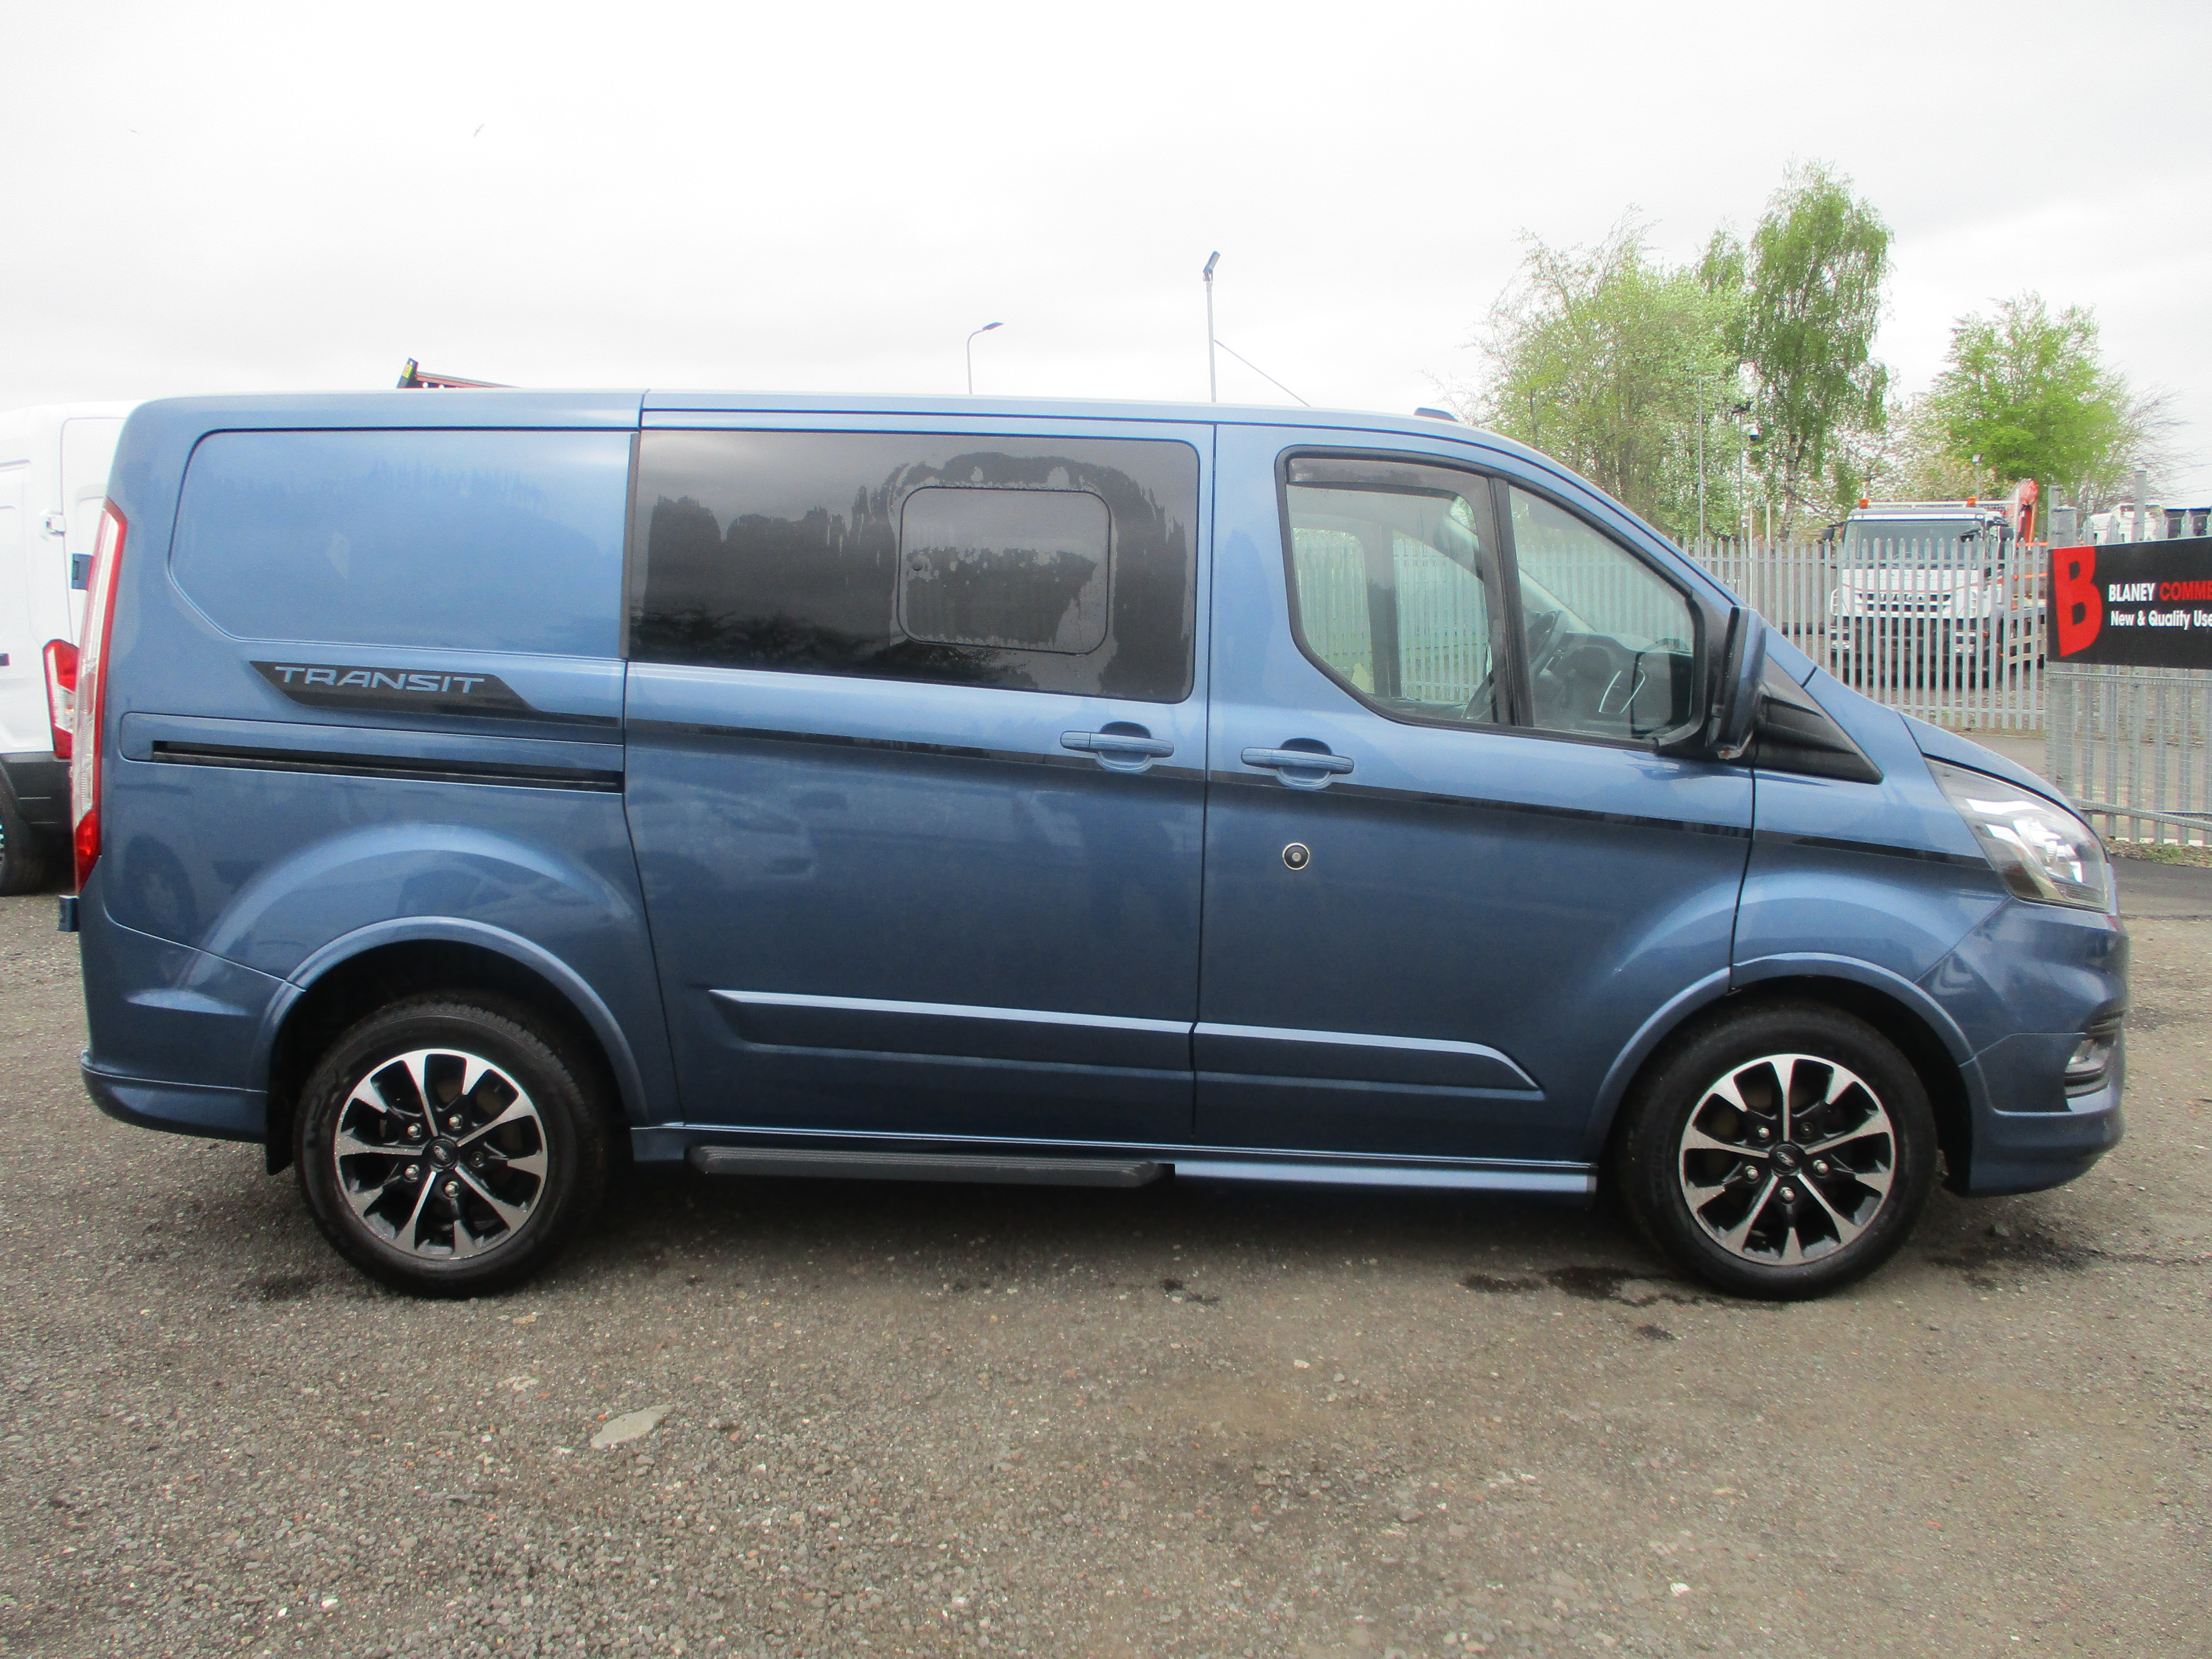 Ford Custom 320 L1H1 2.0 EcoBlue 185PS DCIV (5 Seater) AUTO Sport Van ( £2,050 OFF RRP )